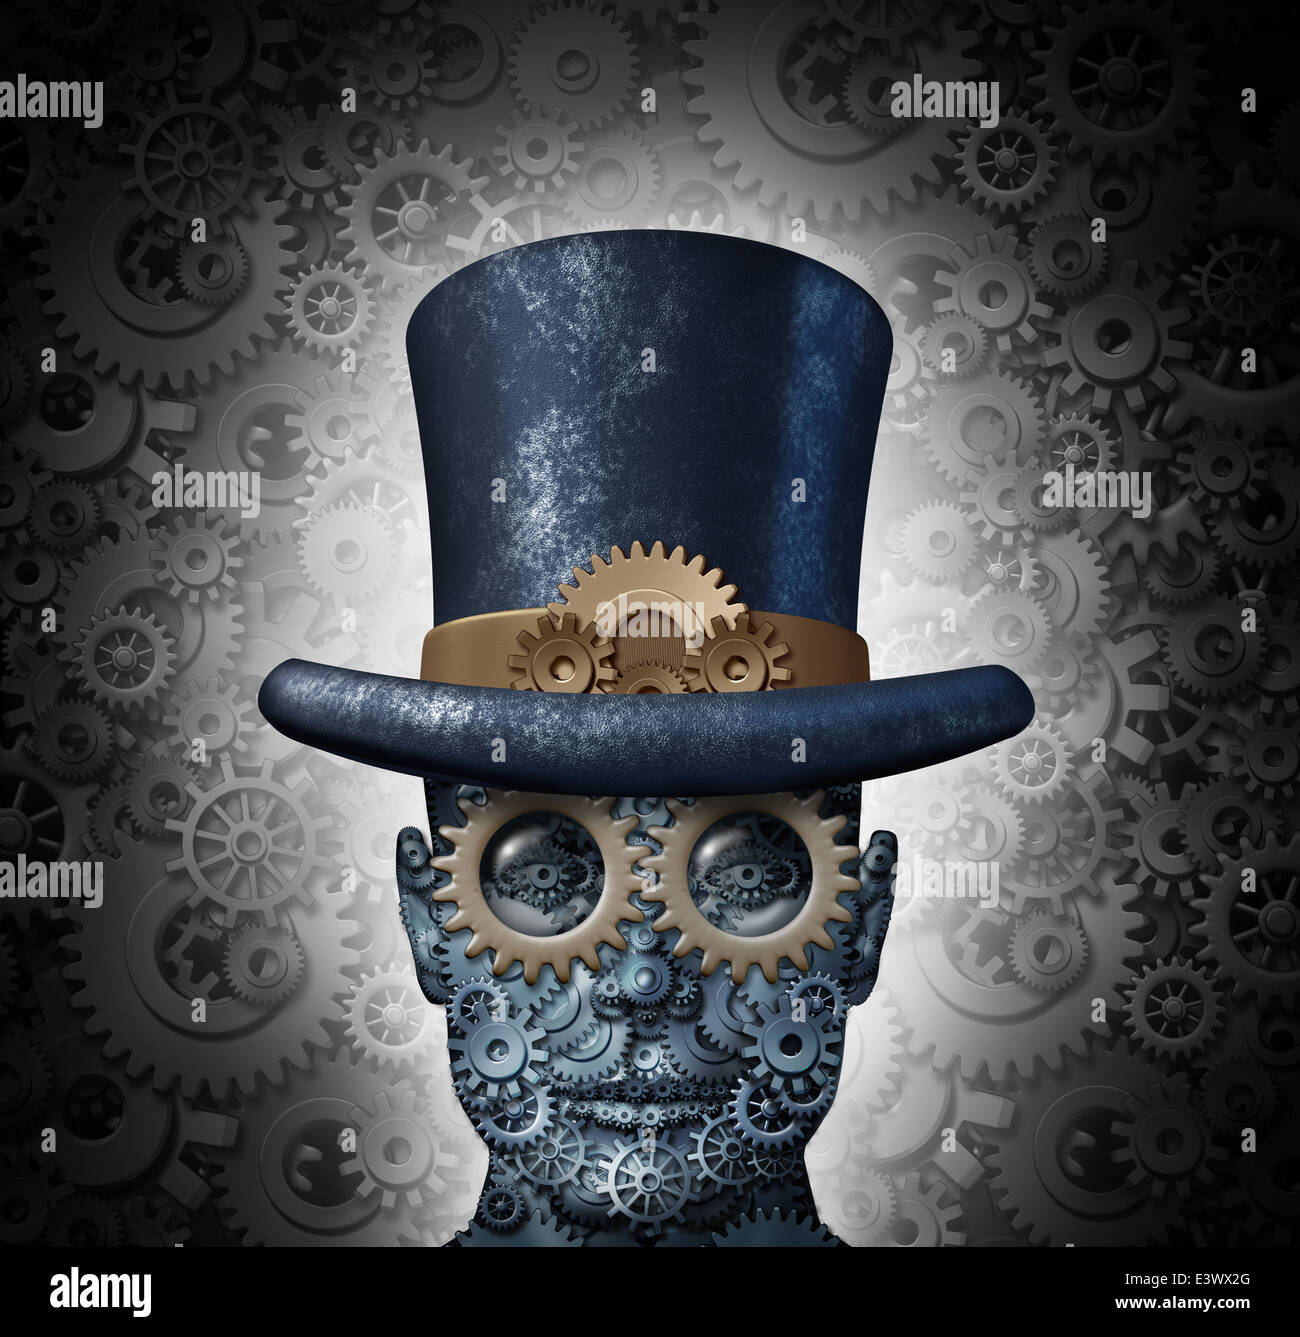 Steampunk science fiction concept as a fantasy mechanical human head made of gears and cogs wearing a historical victorian retro top hat as a technology symbol of futuristic fictional machine hybrid. Stock Photo